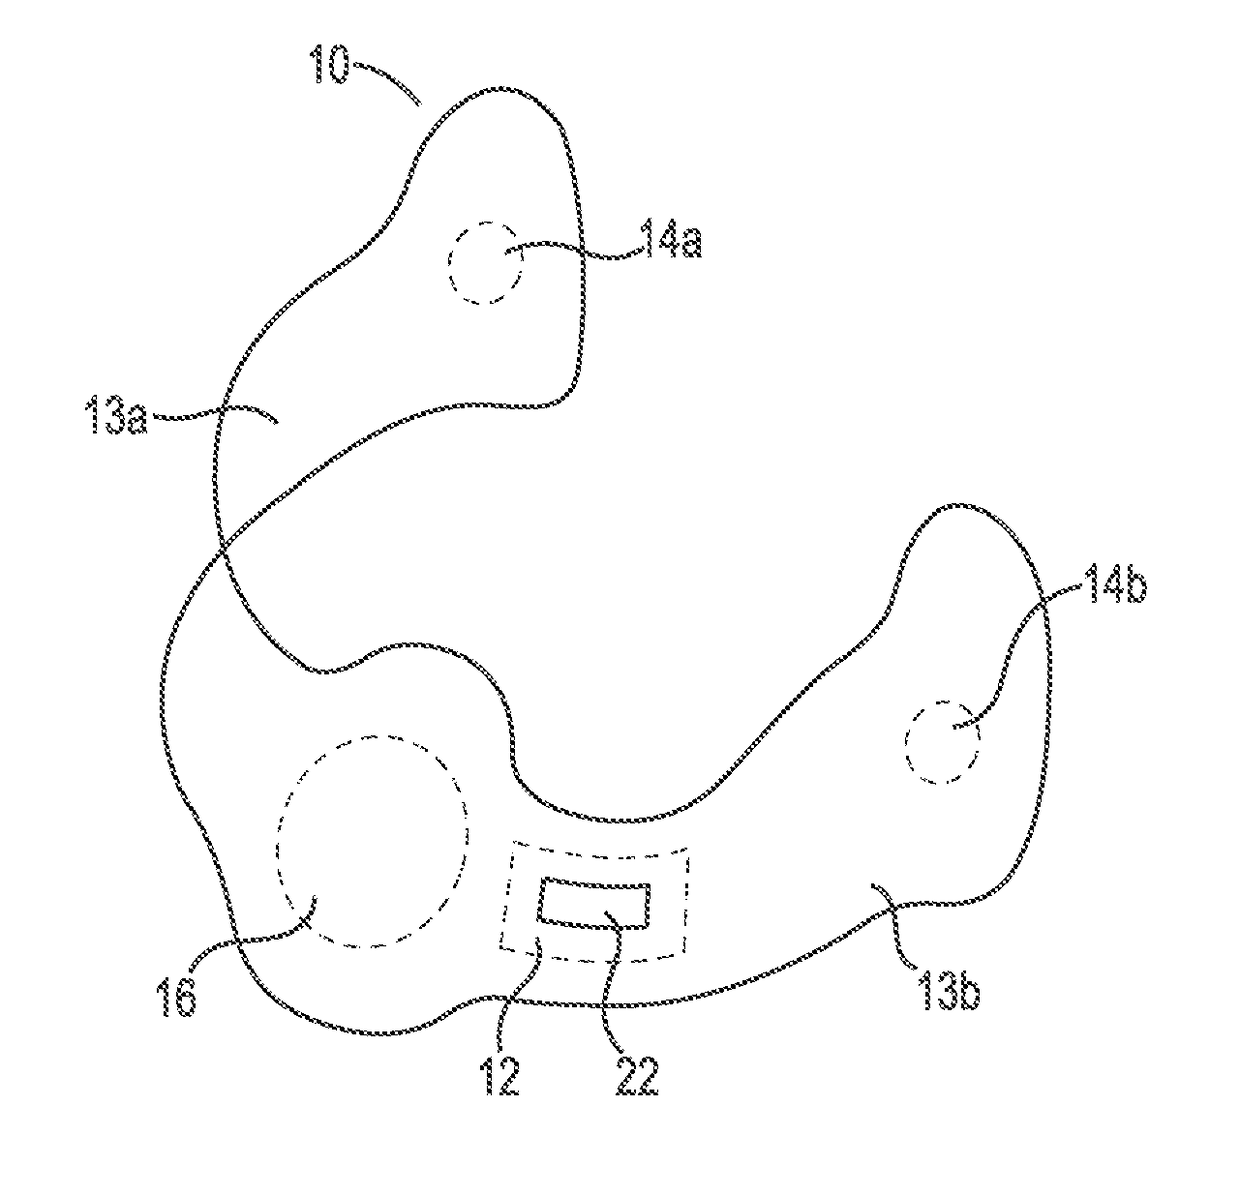 Sensory stimulation or monitoring apparatus for the back of neck